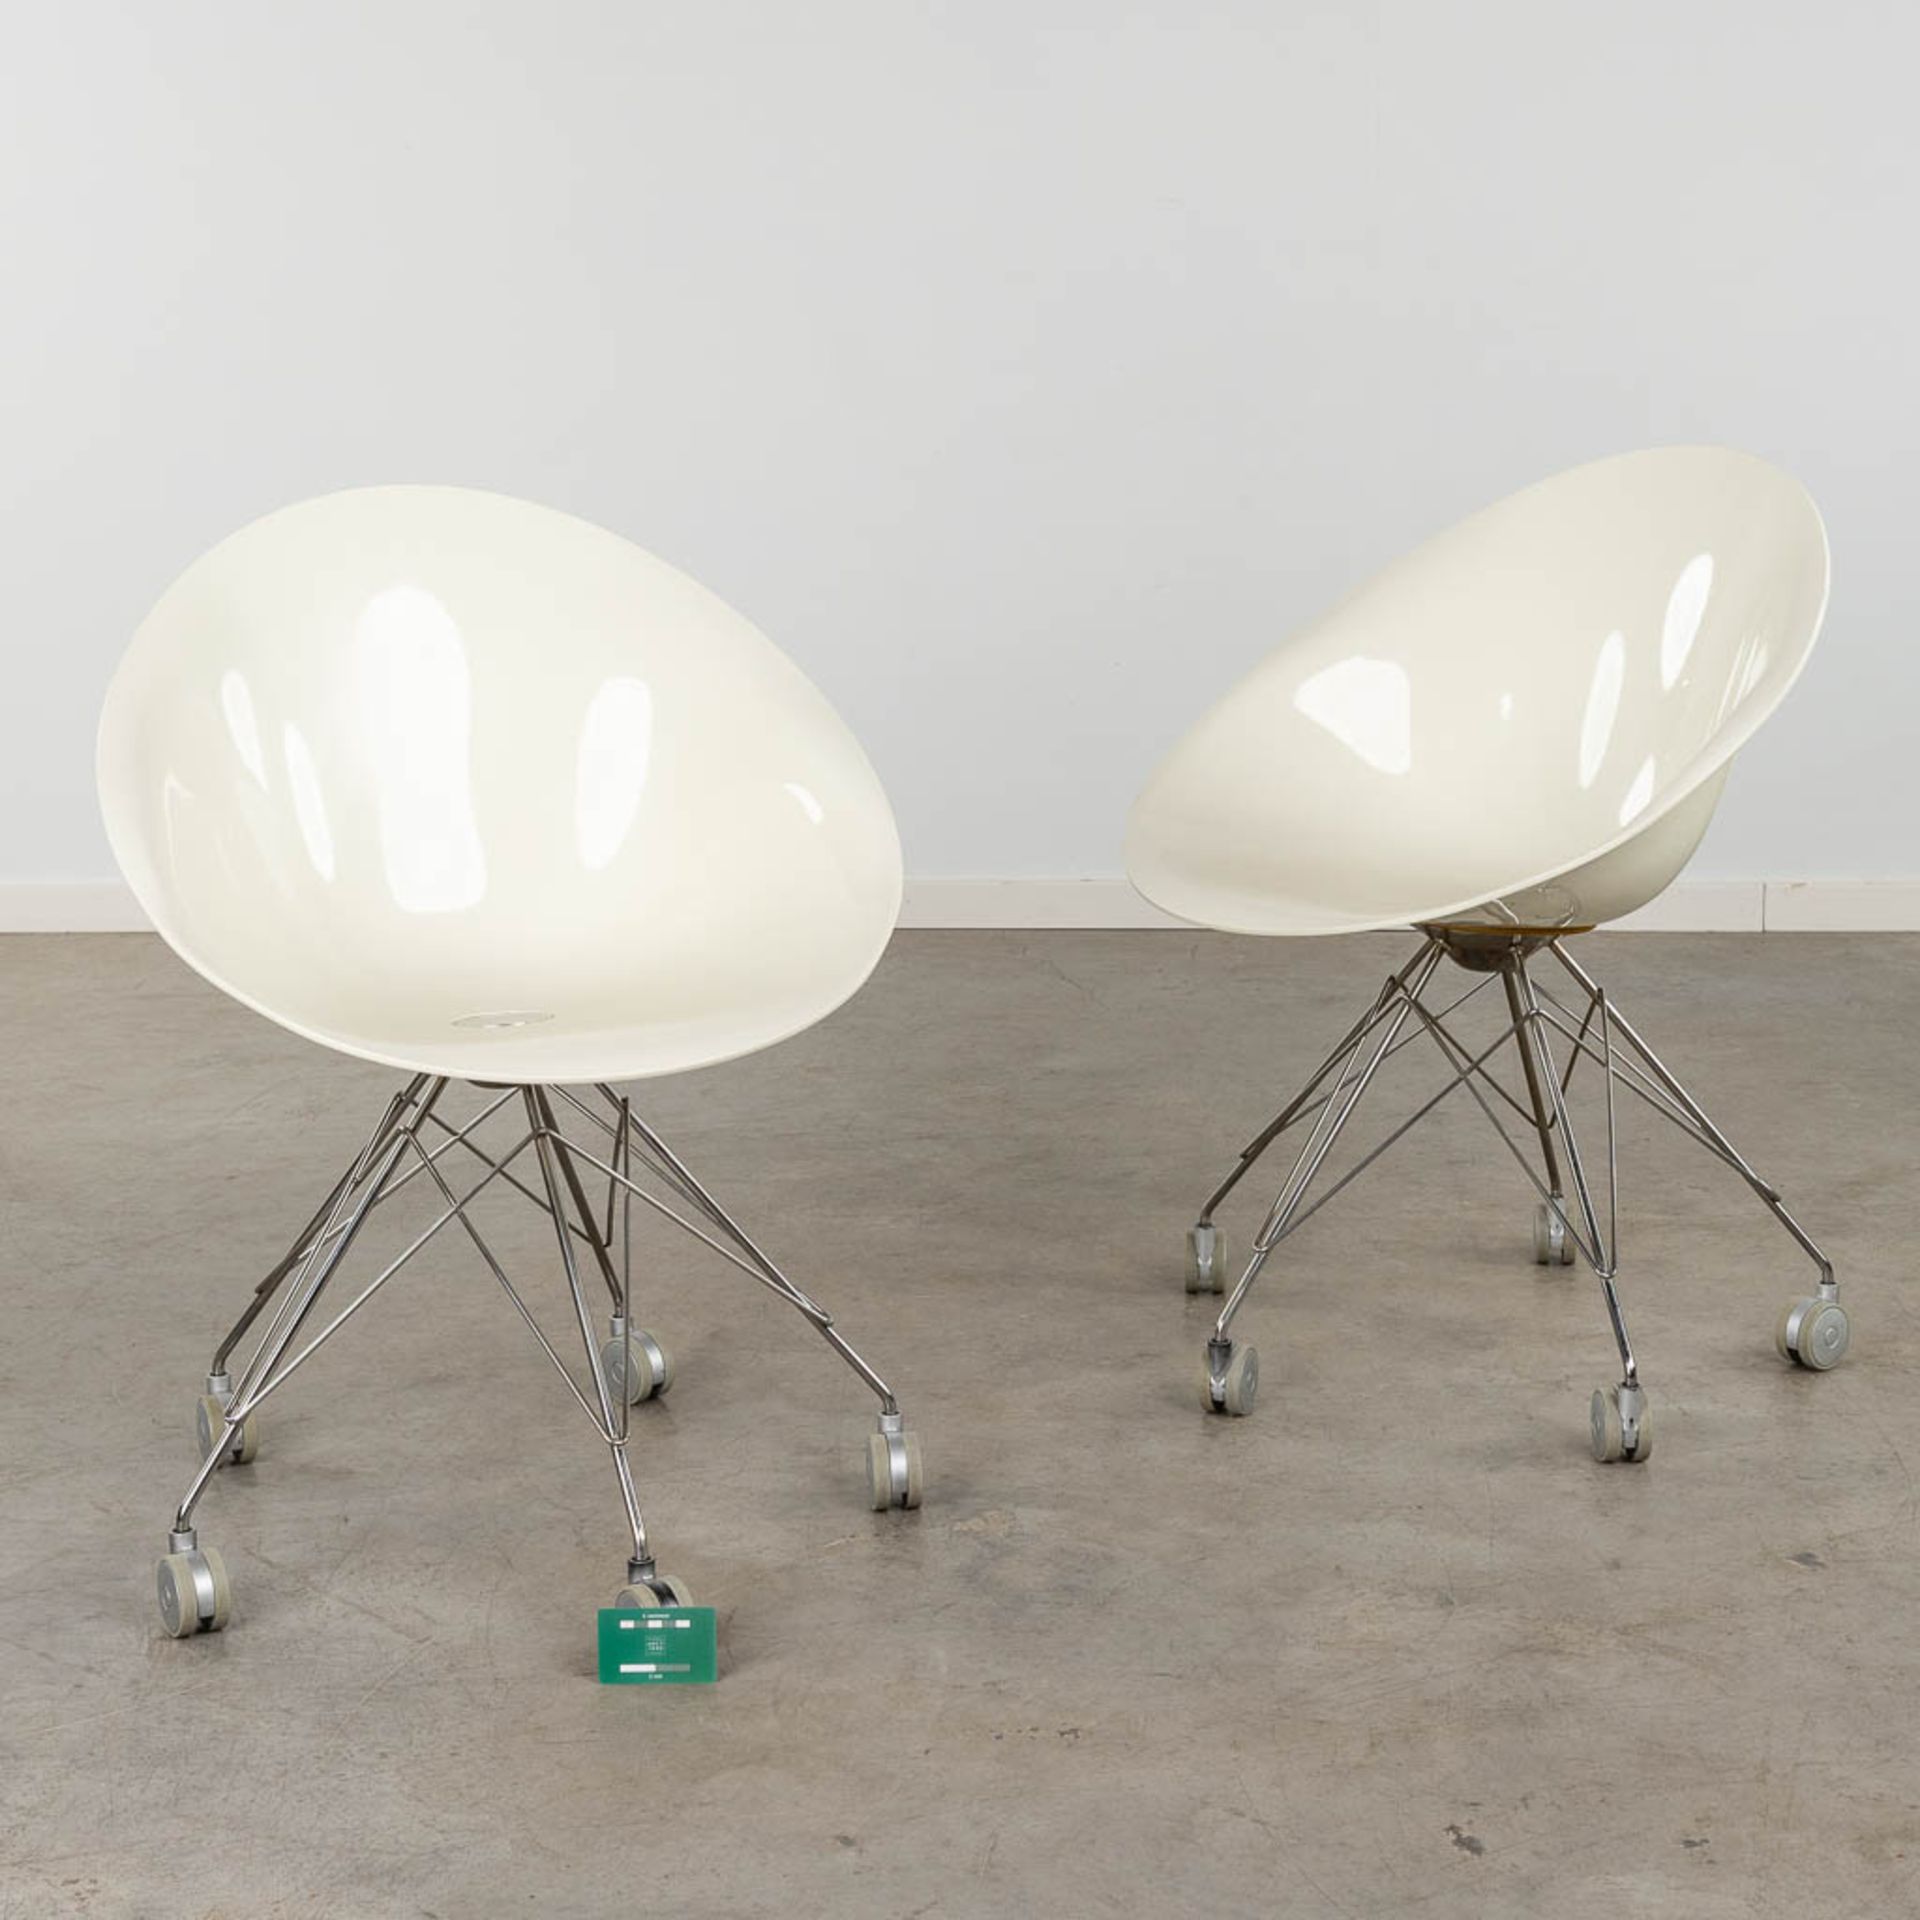 Philippe STARCK (1949) 'Ero' for Kartell, two office chairs. (D:59 x W:62 x H:82 cm) - Image 2 of 14